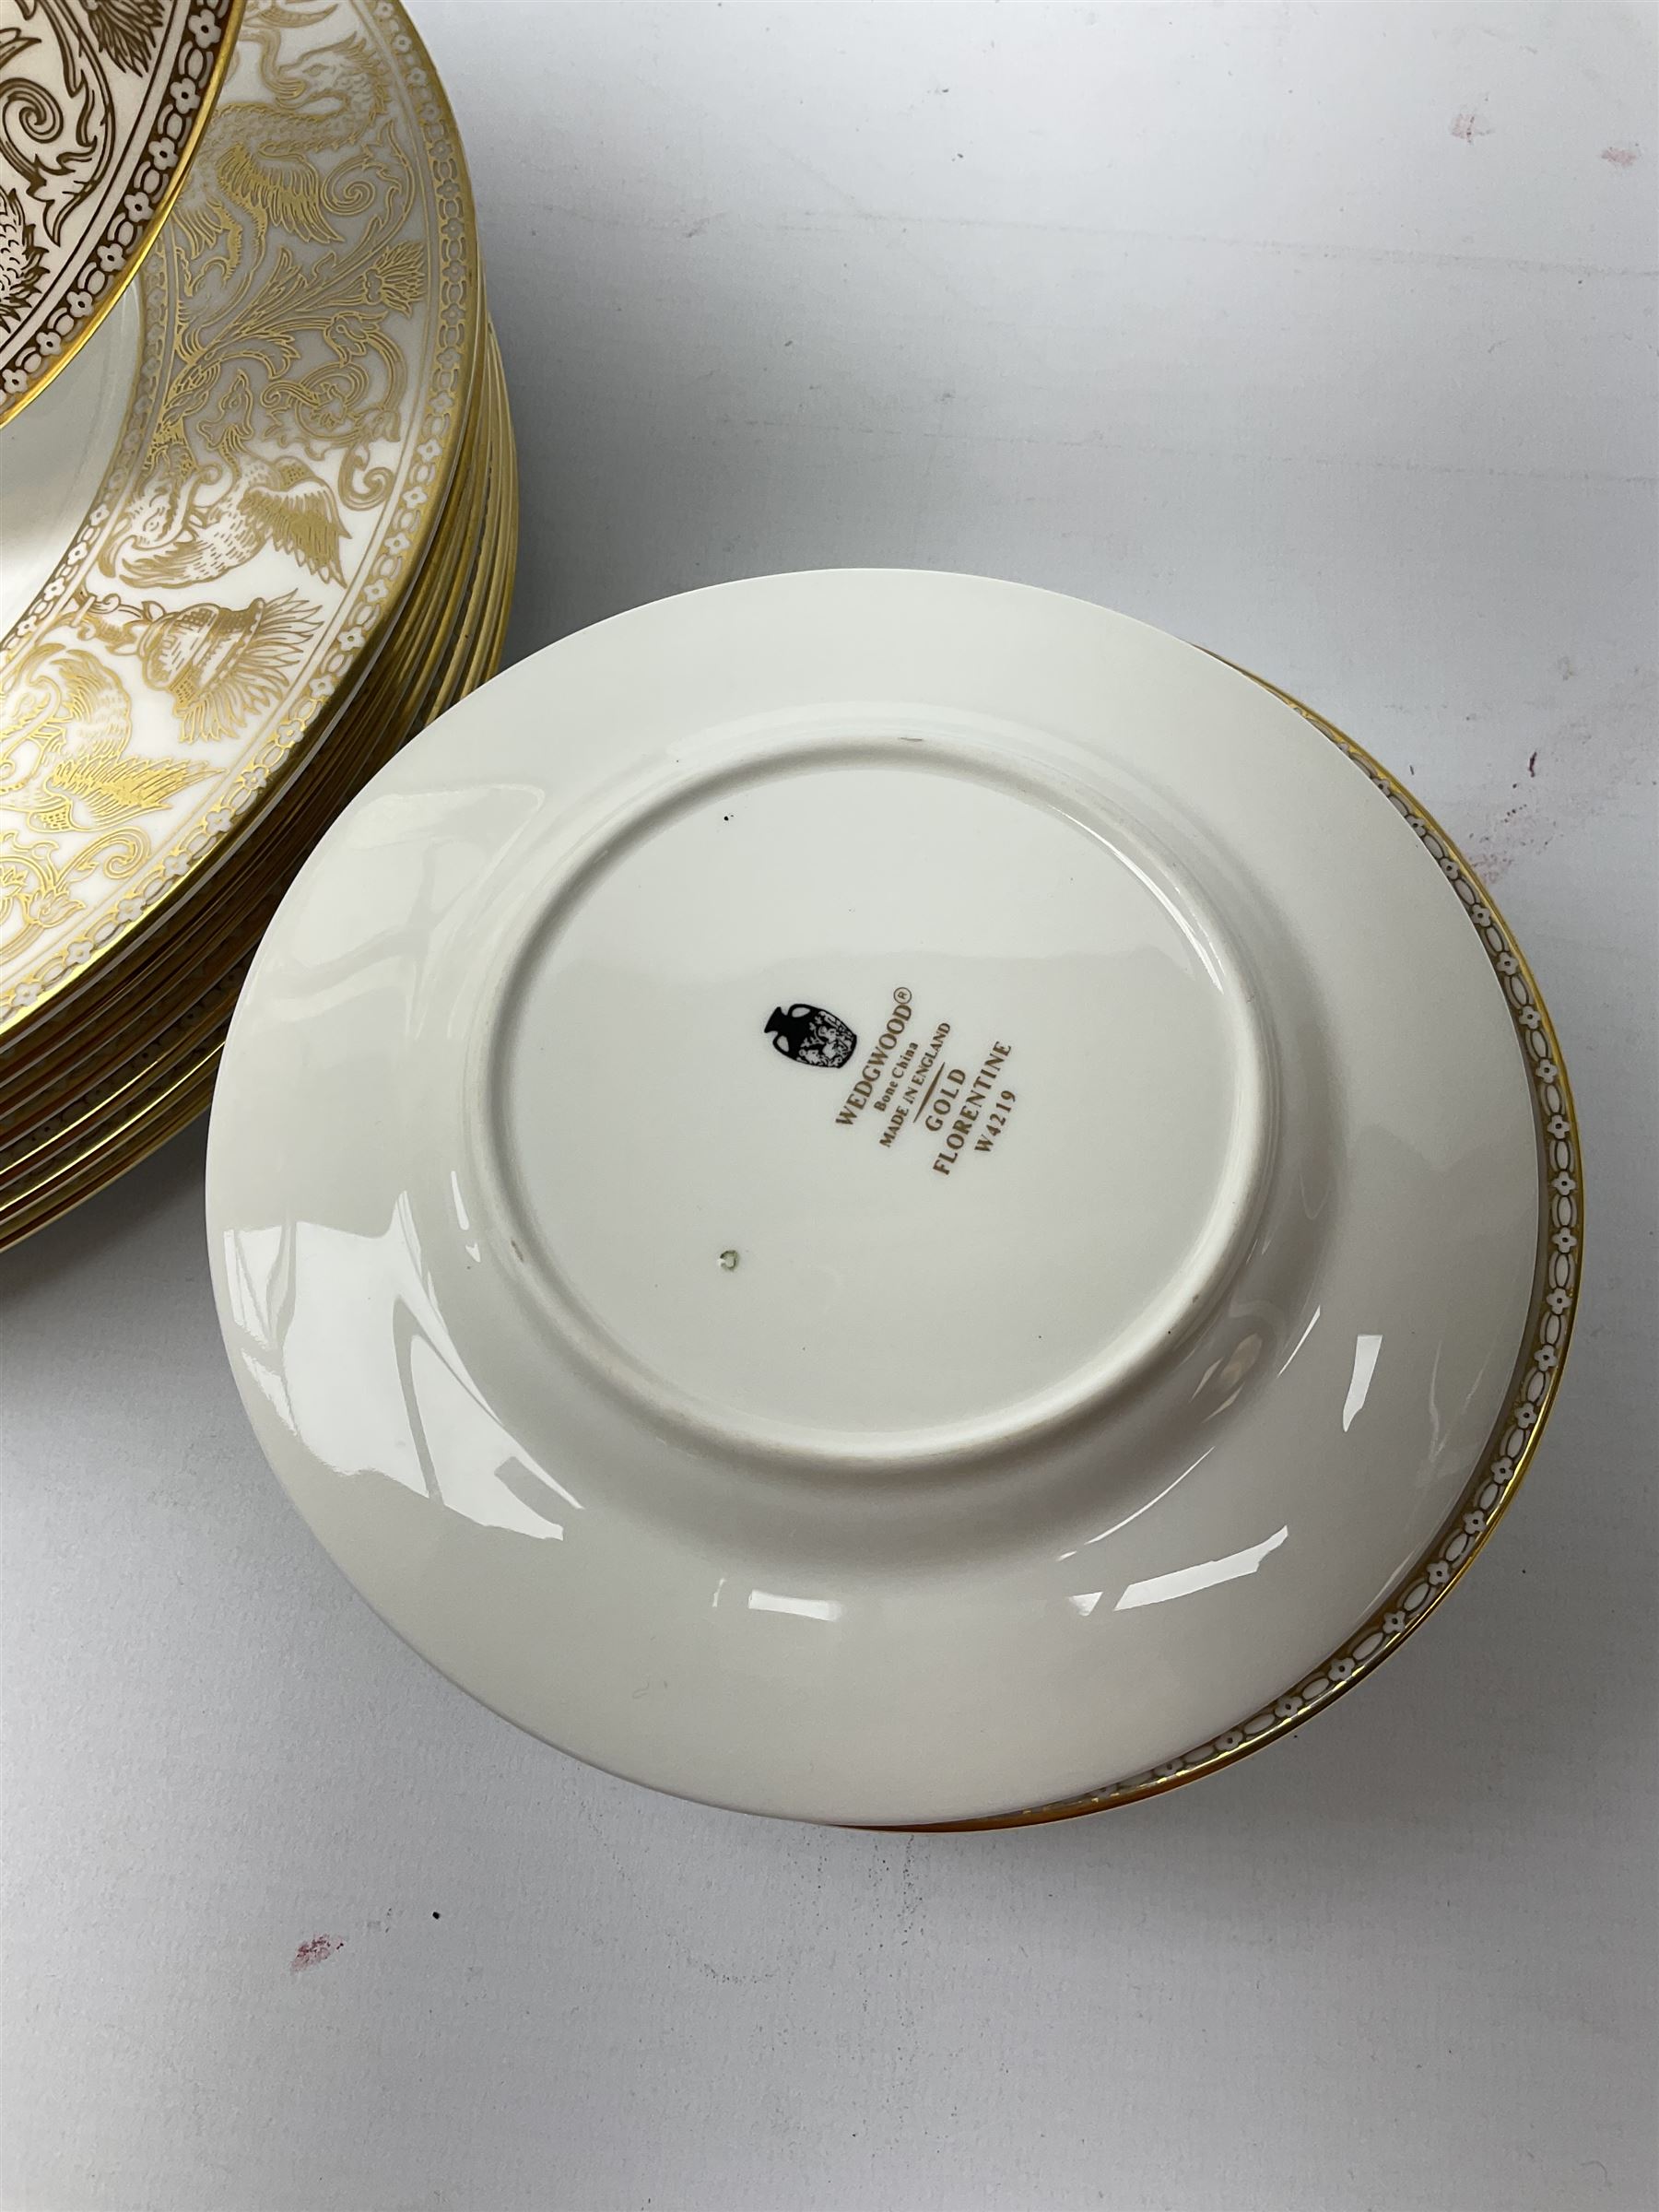 Wedgwood dinner wares decorated in the 'Gold Florentine' pattern - Image 2 of 2